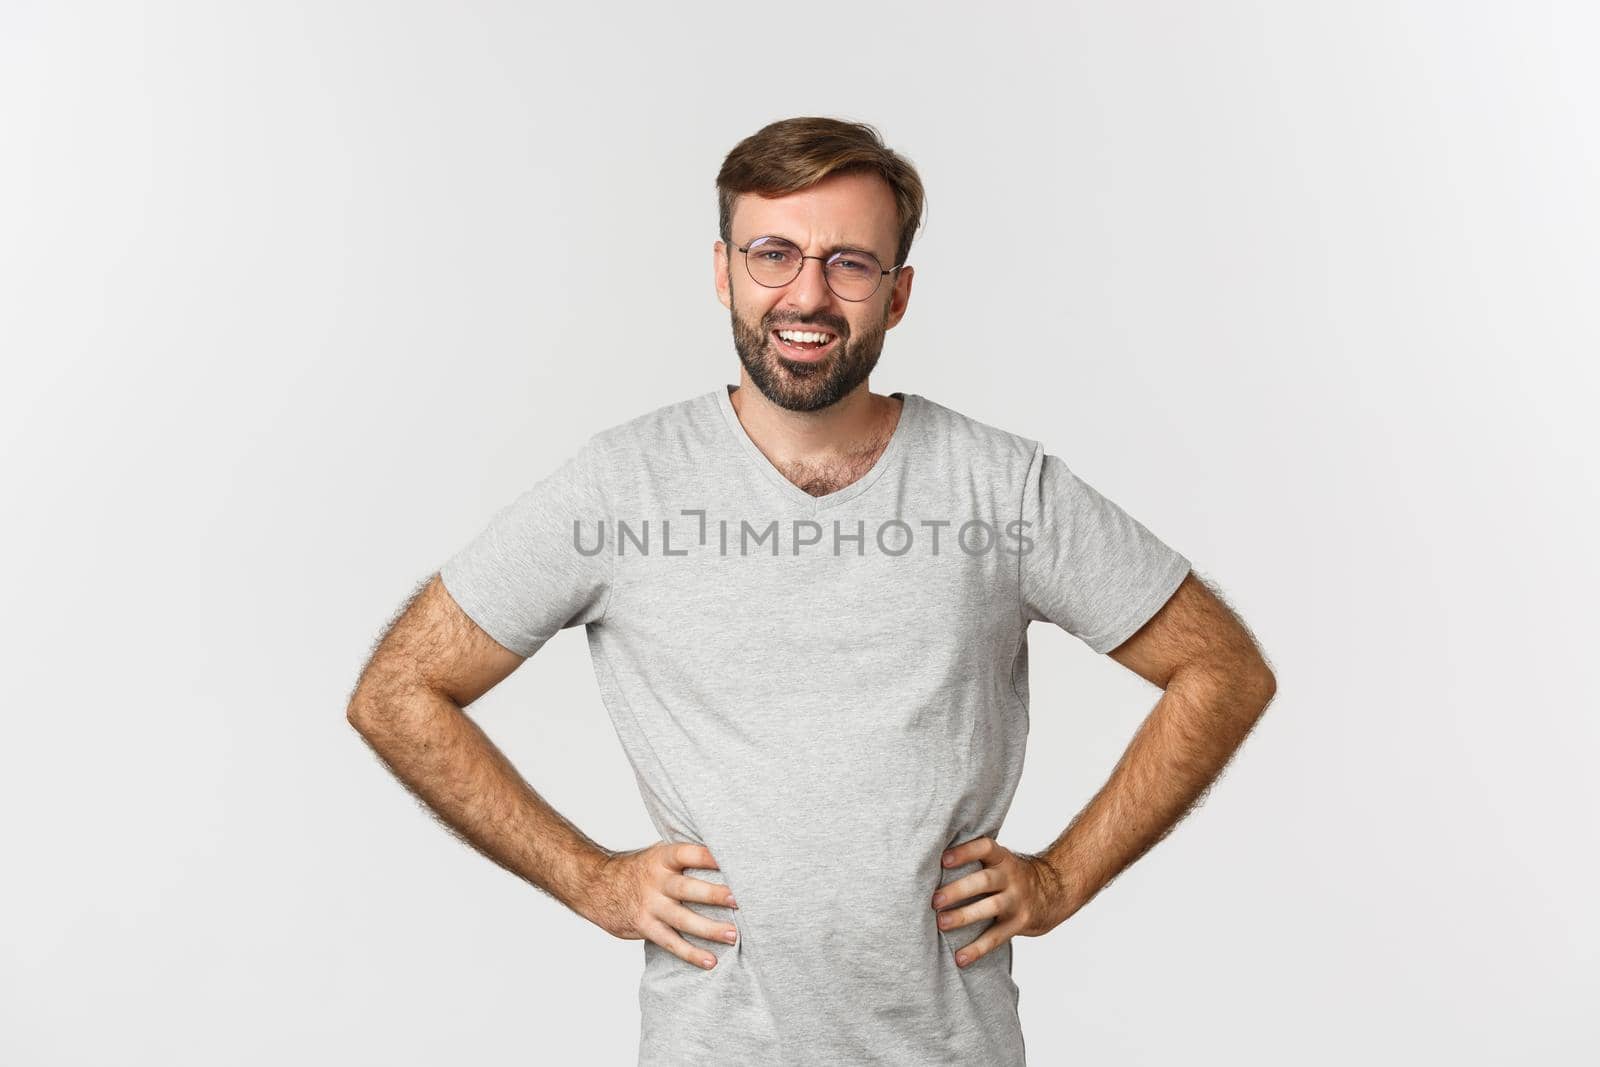 Image of confused bearded man in glasses and gray t-shirt, looking at something strange, frowning perplexed, standing over white background.